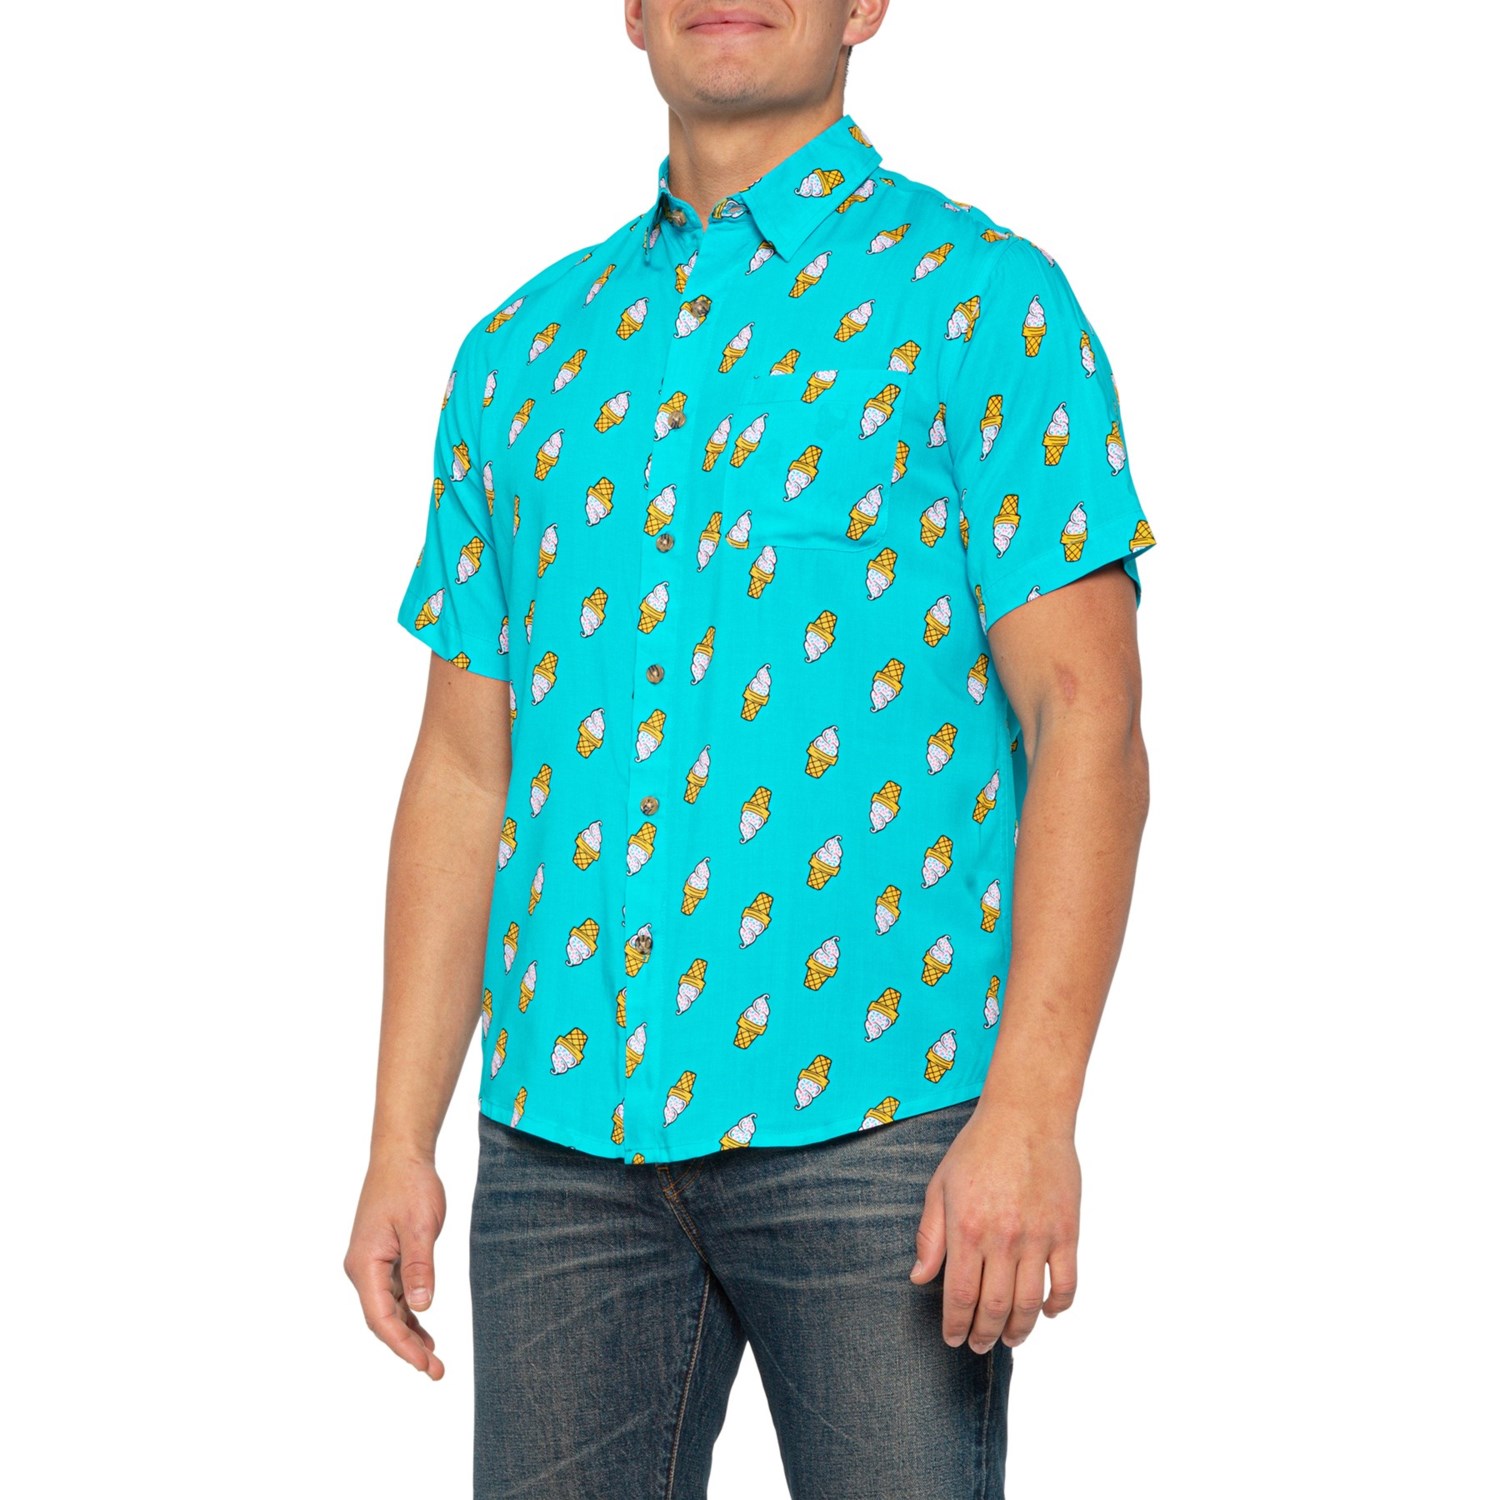 Visitor Ice Cream Cone Print Shirt (For Men) - Save 48%